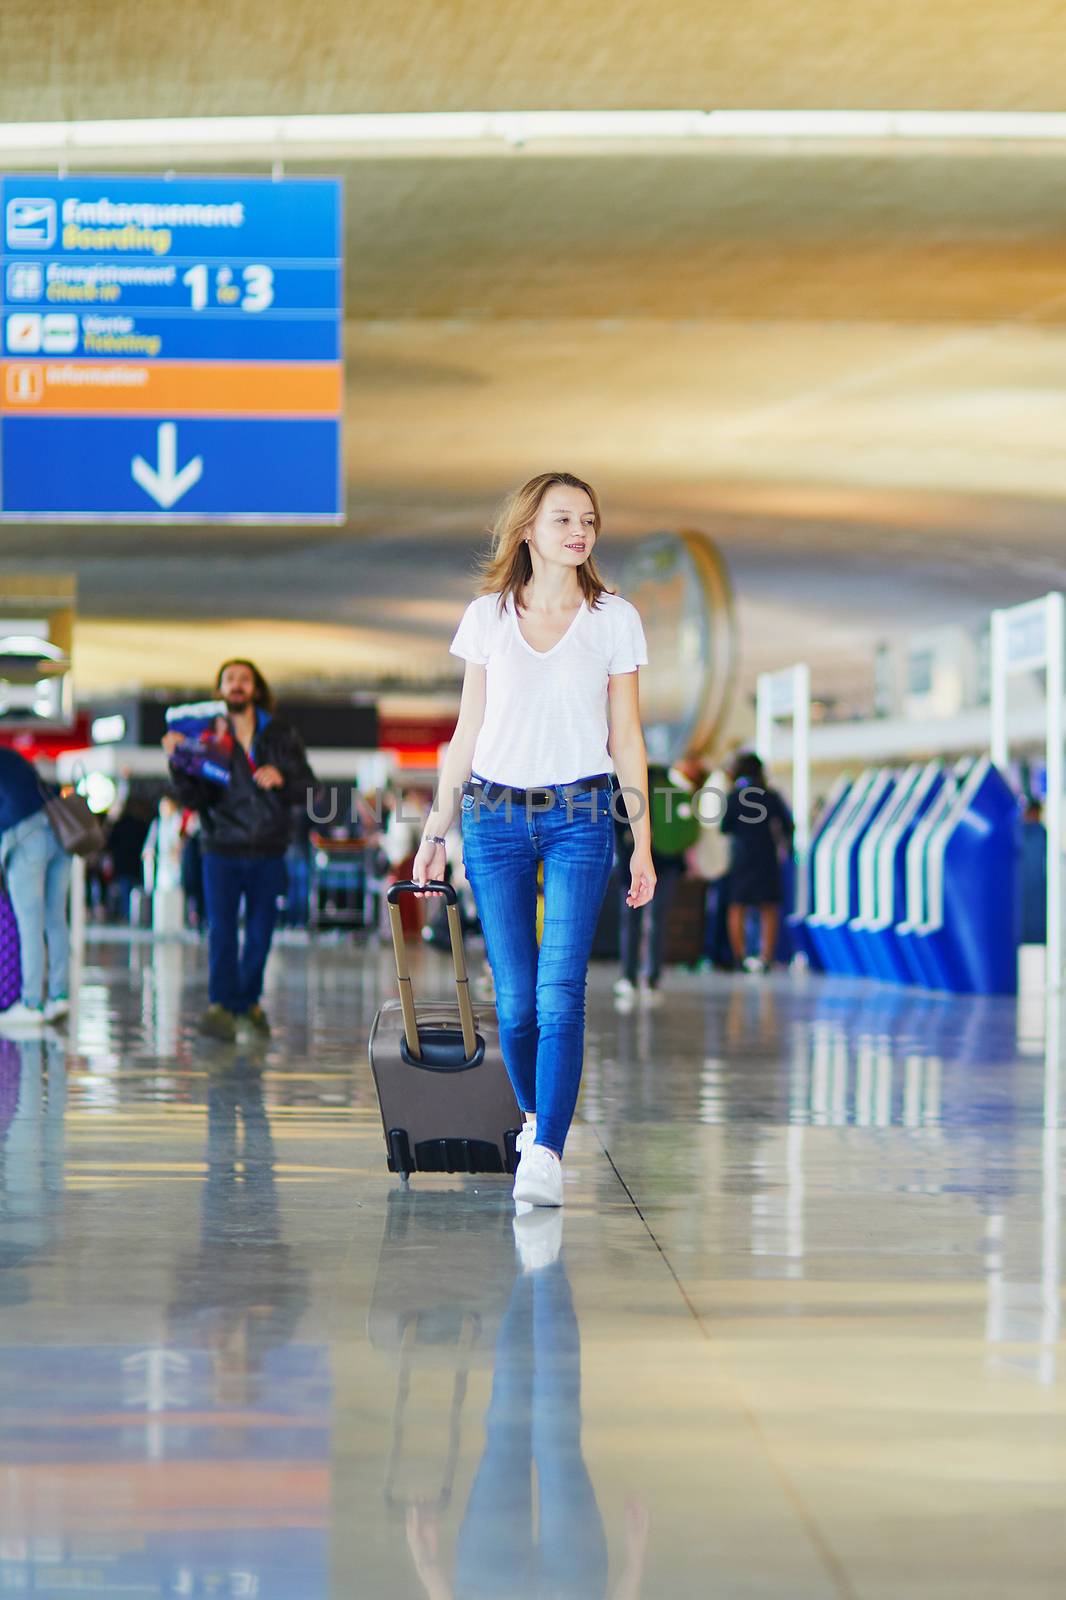 Young woman in international airport walking with luggage, ready for her flight